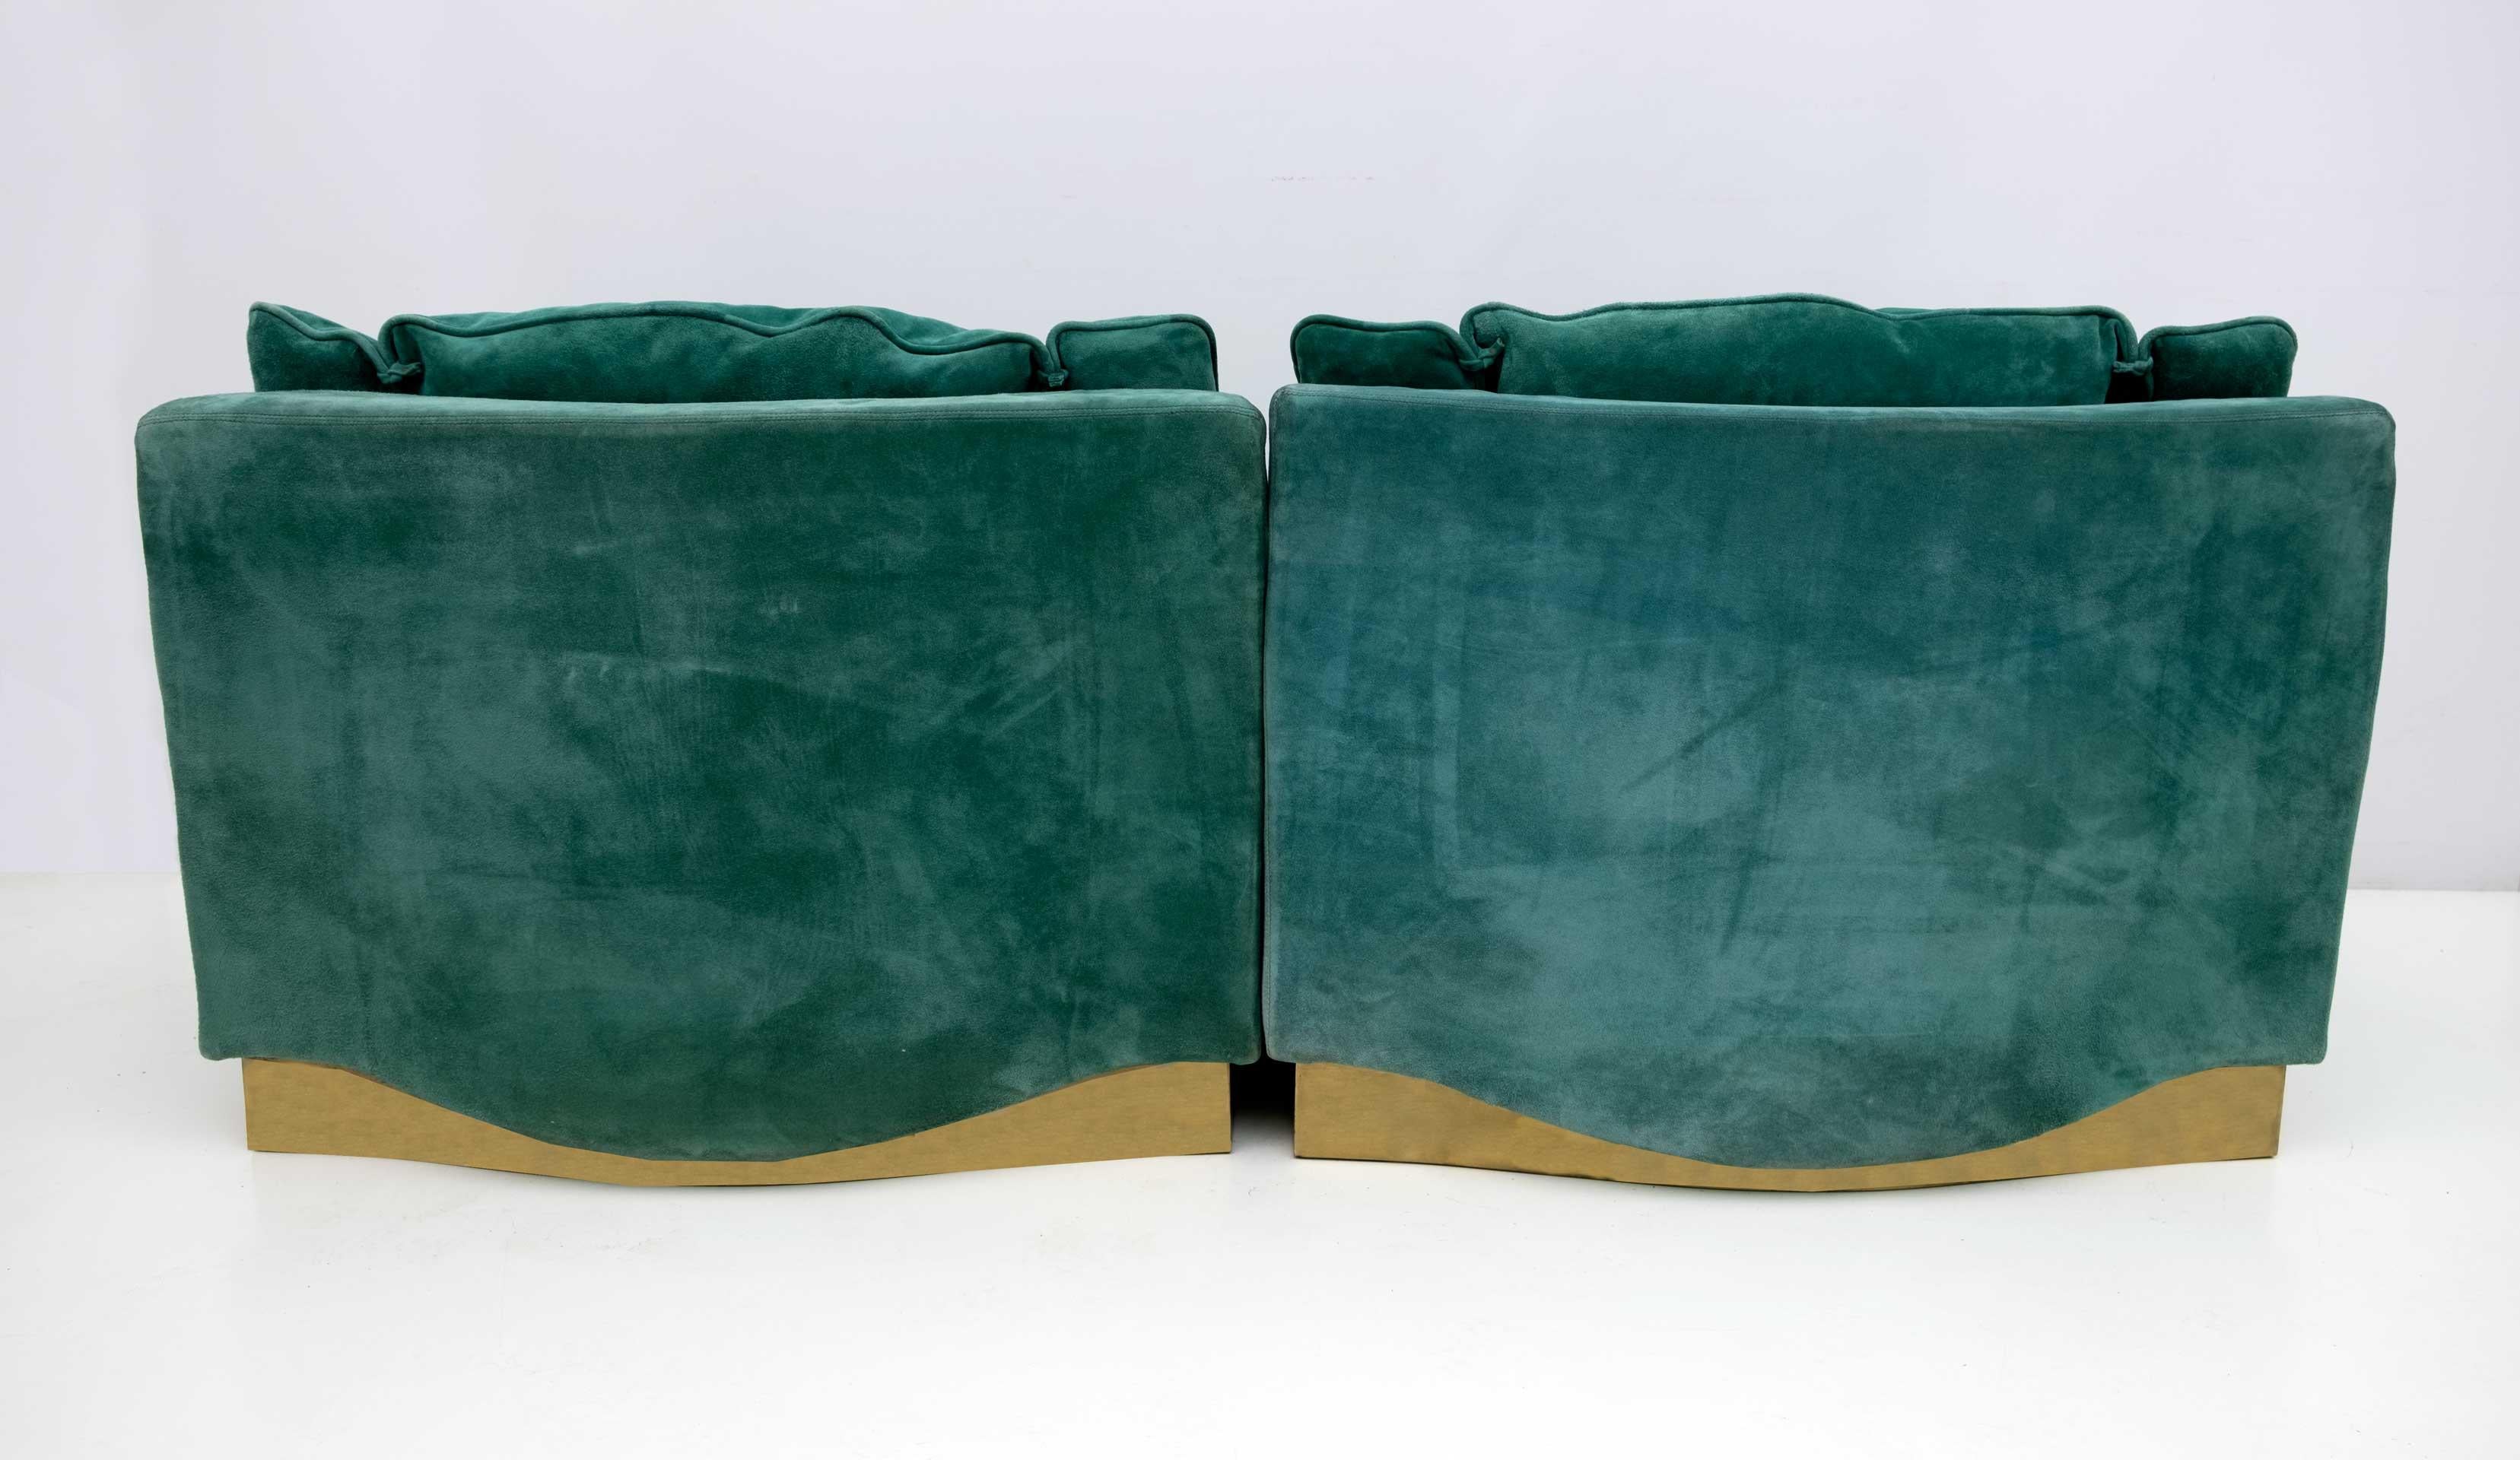 Pair of Luciano Frigerio Mid-Century Modern Suede Armchairs and Footrest, 1970s For Sale 6